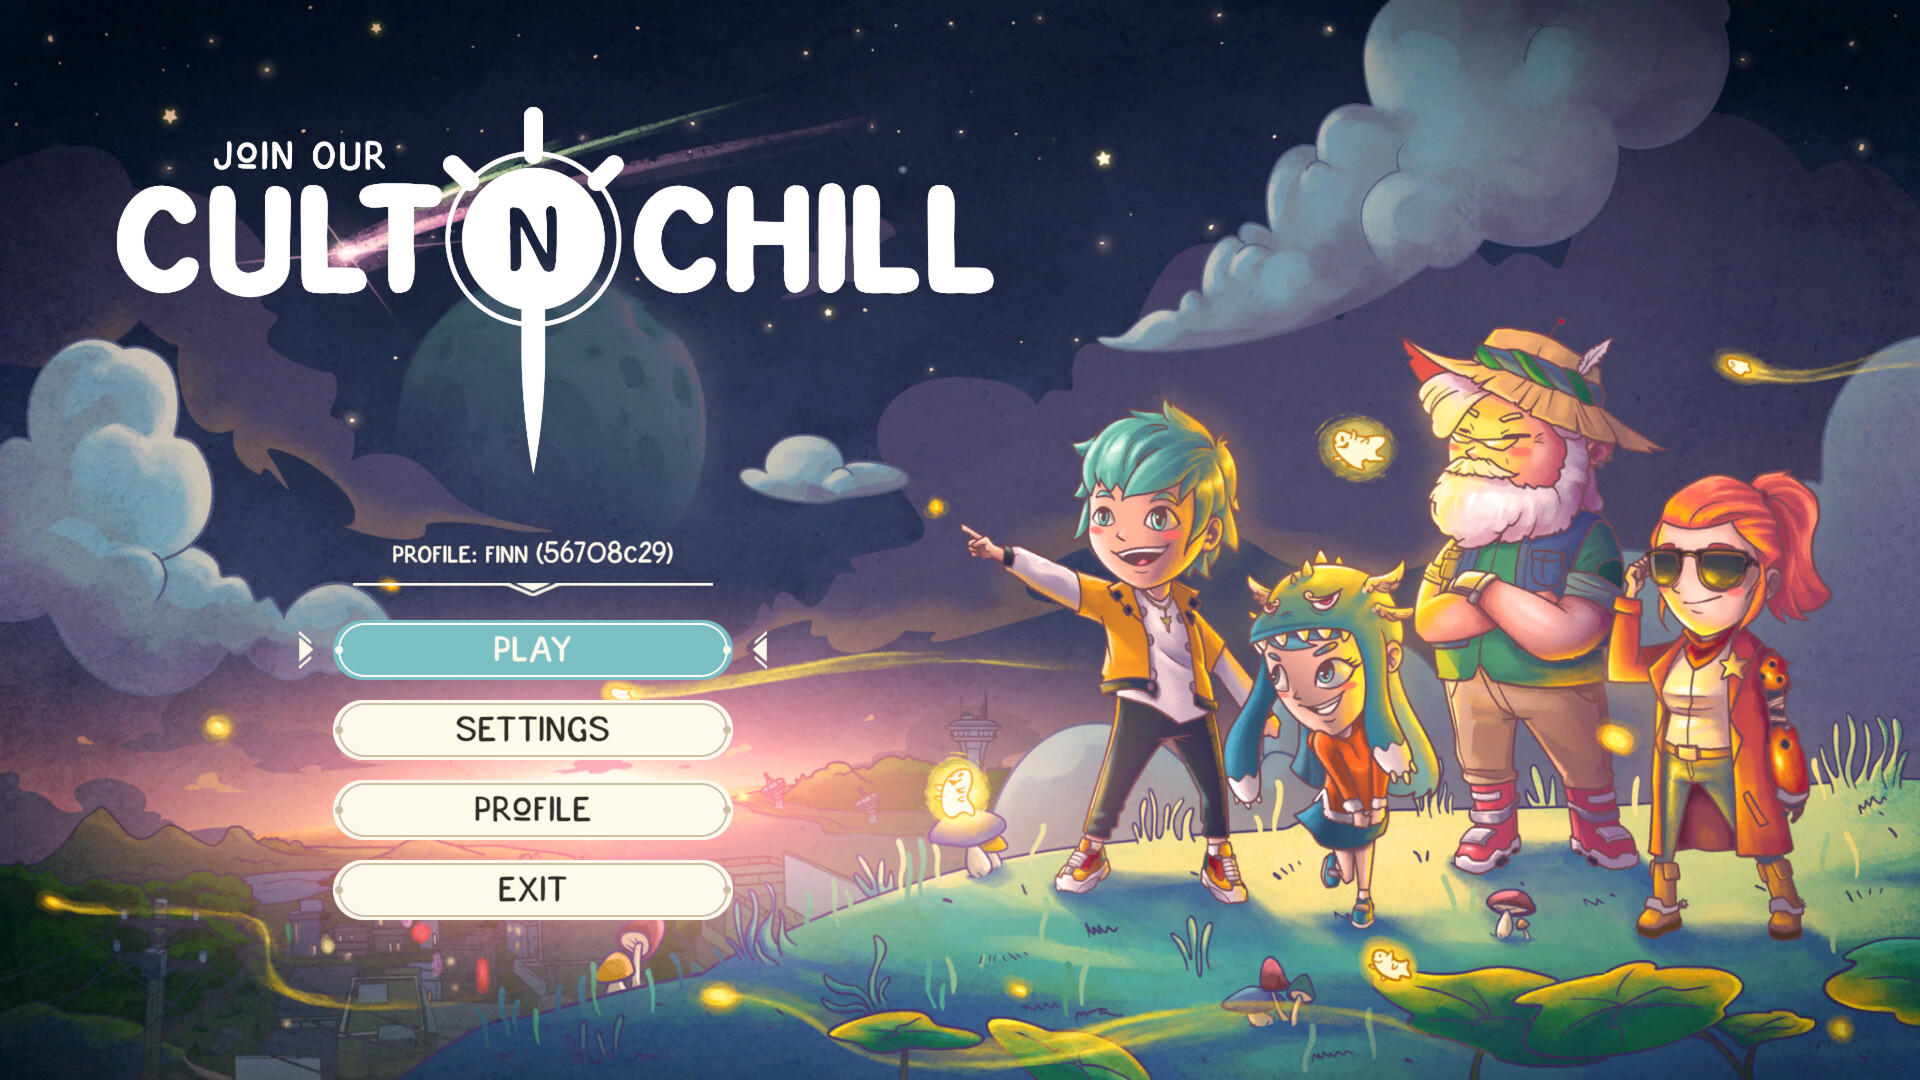 Join Our Cult n Chill 게임 스크린 샷